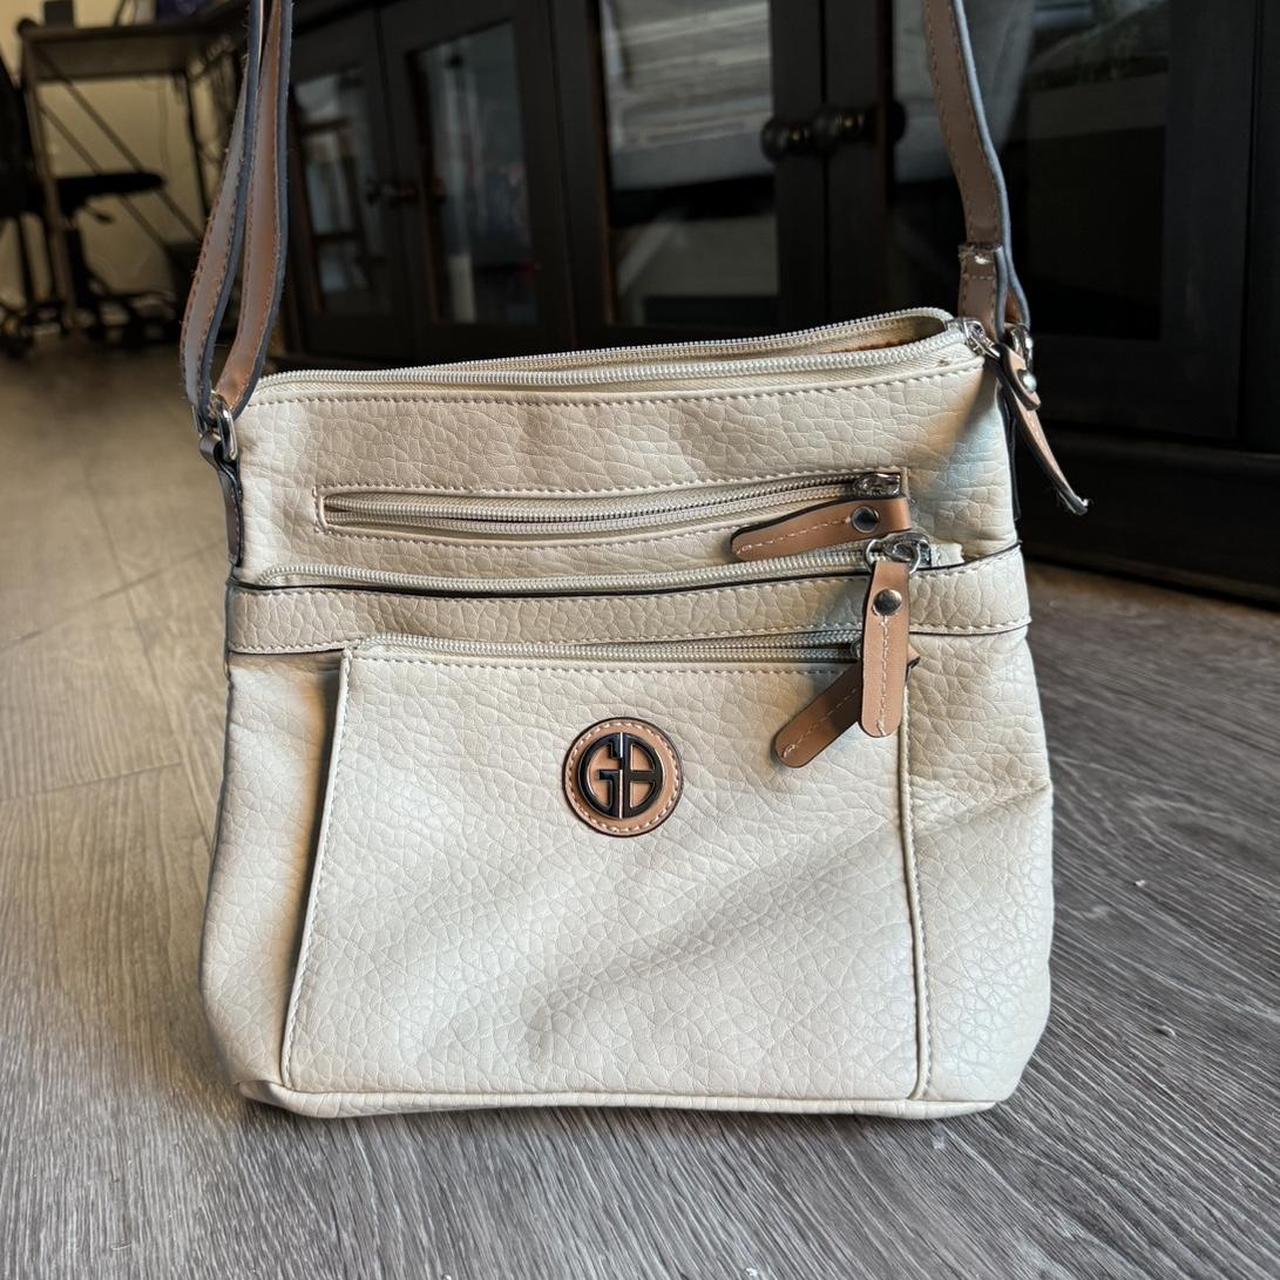 COACH Colorblocked Leather Camera Bag - Macy's